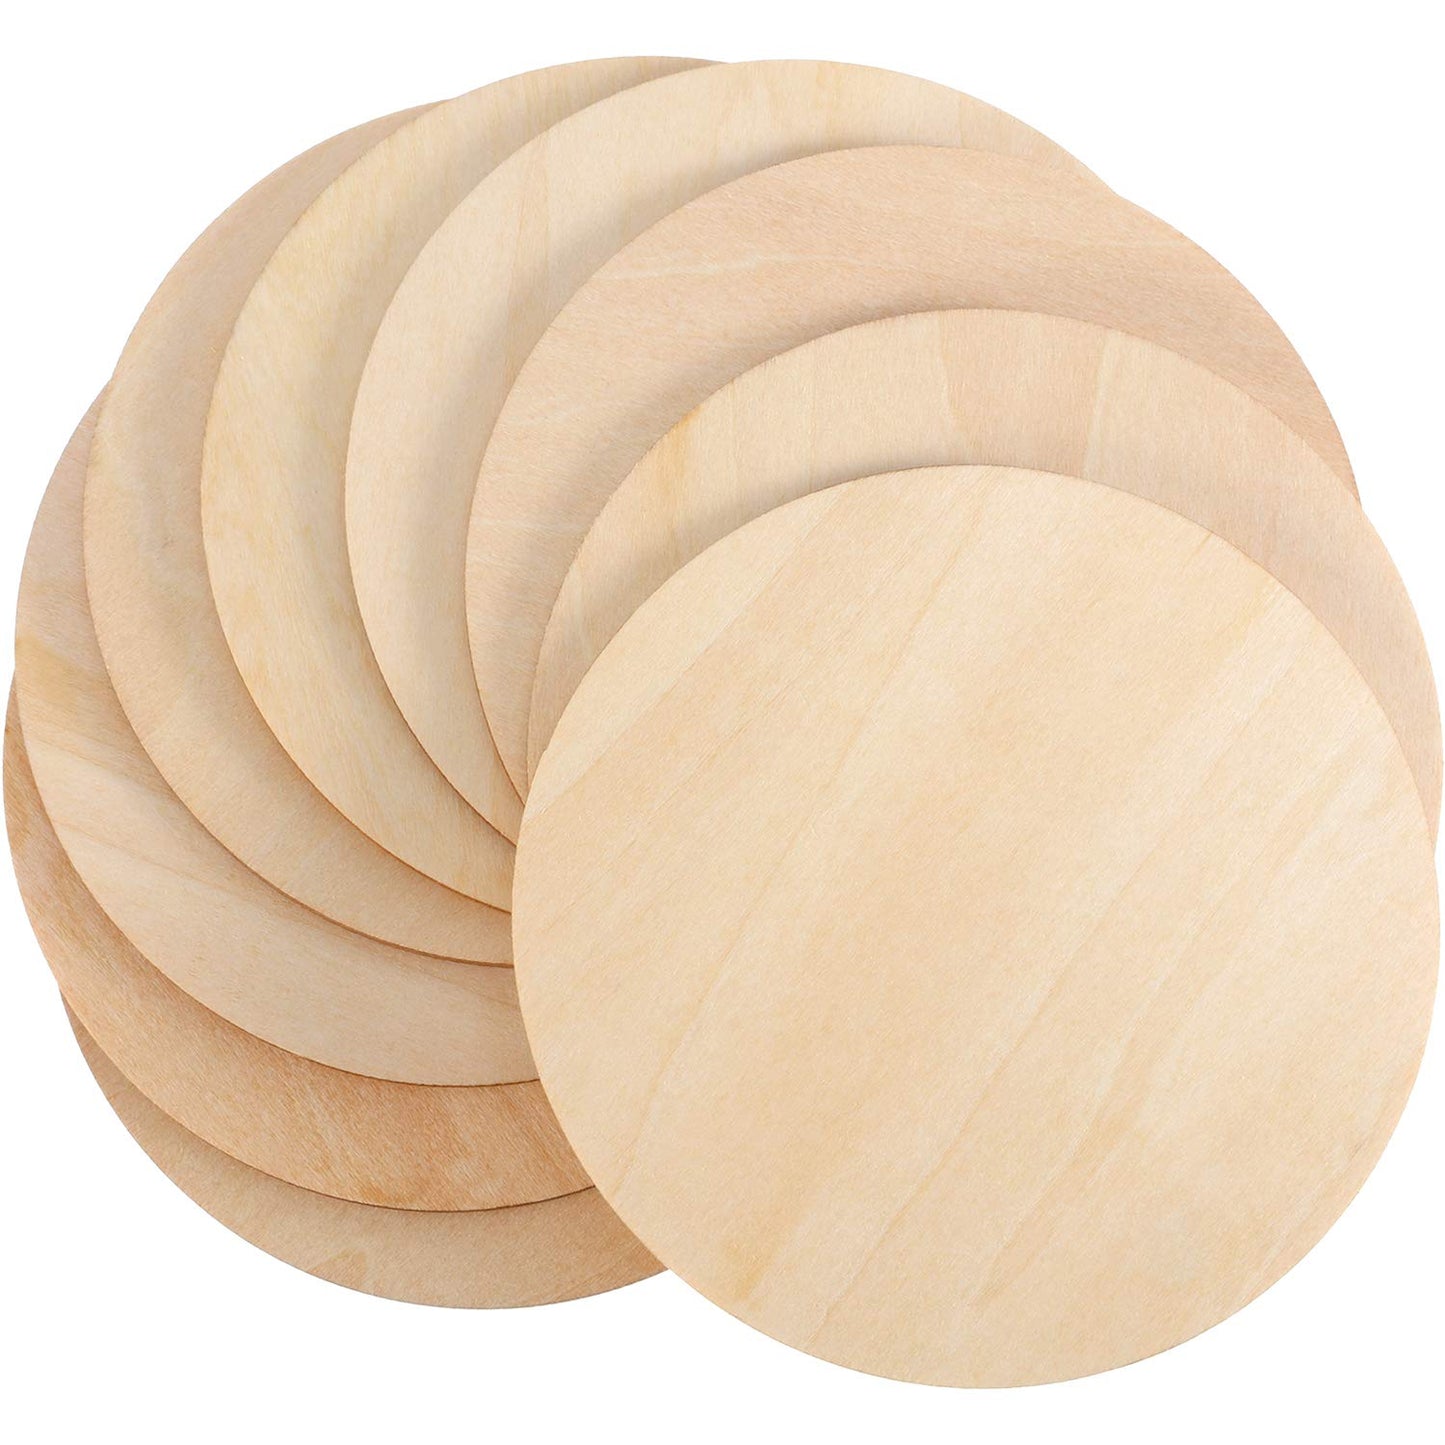 Boao Unfinished Wood Circle Round Wood Pieces Blank Round Ornaments Wooden Cutouts for DIY Craft Project, Decoration, Laser Engraving Carving, 1/8